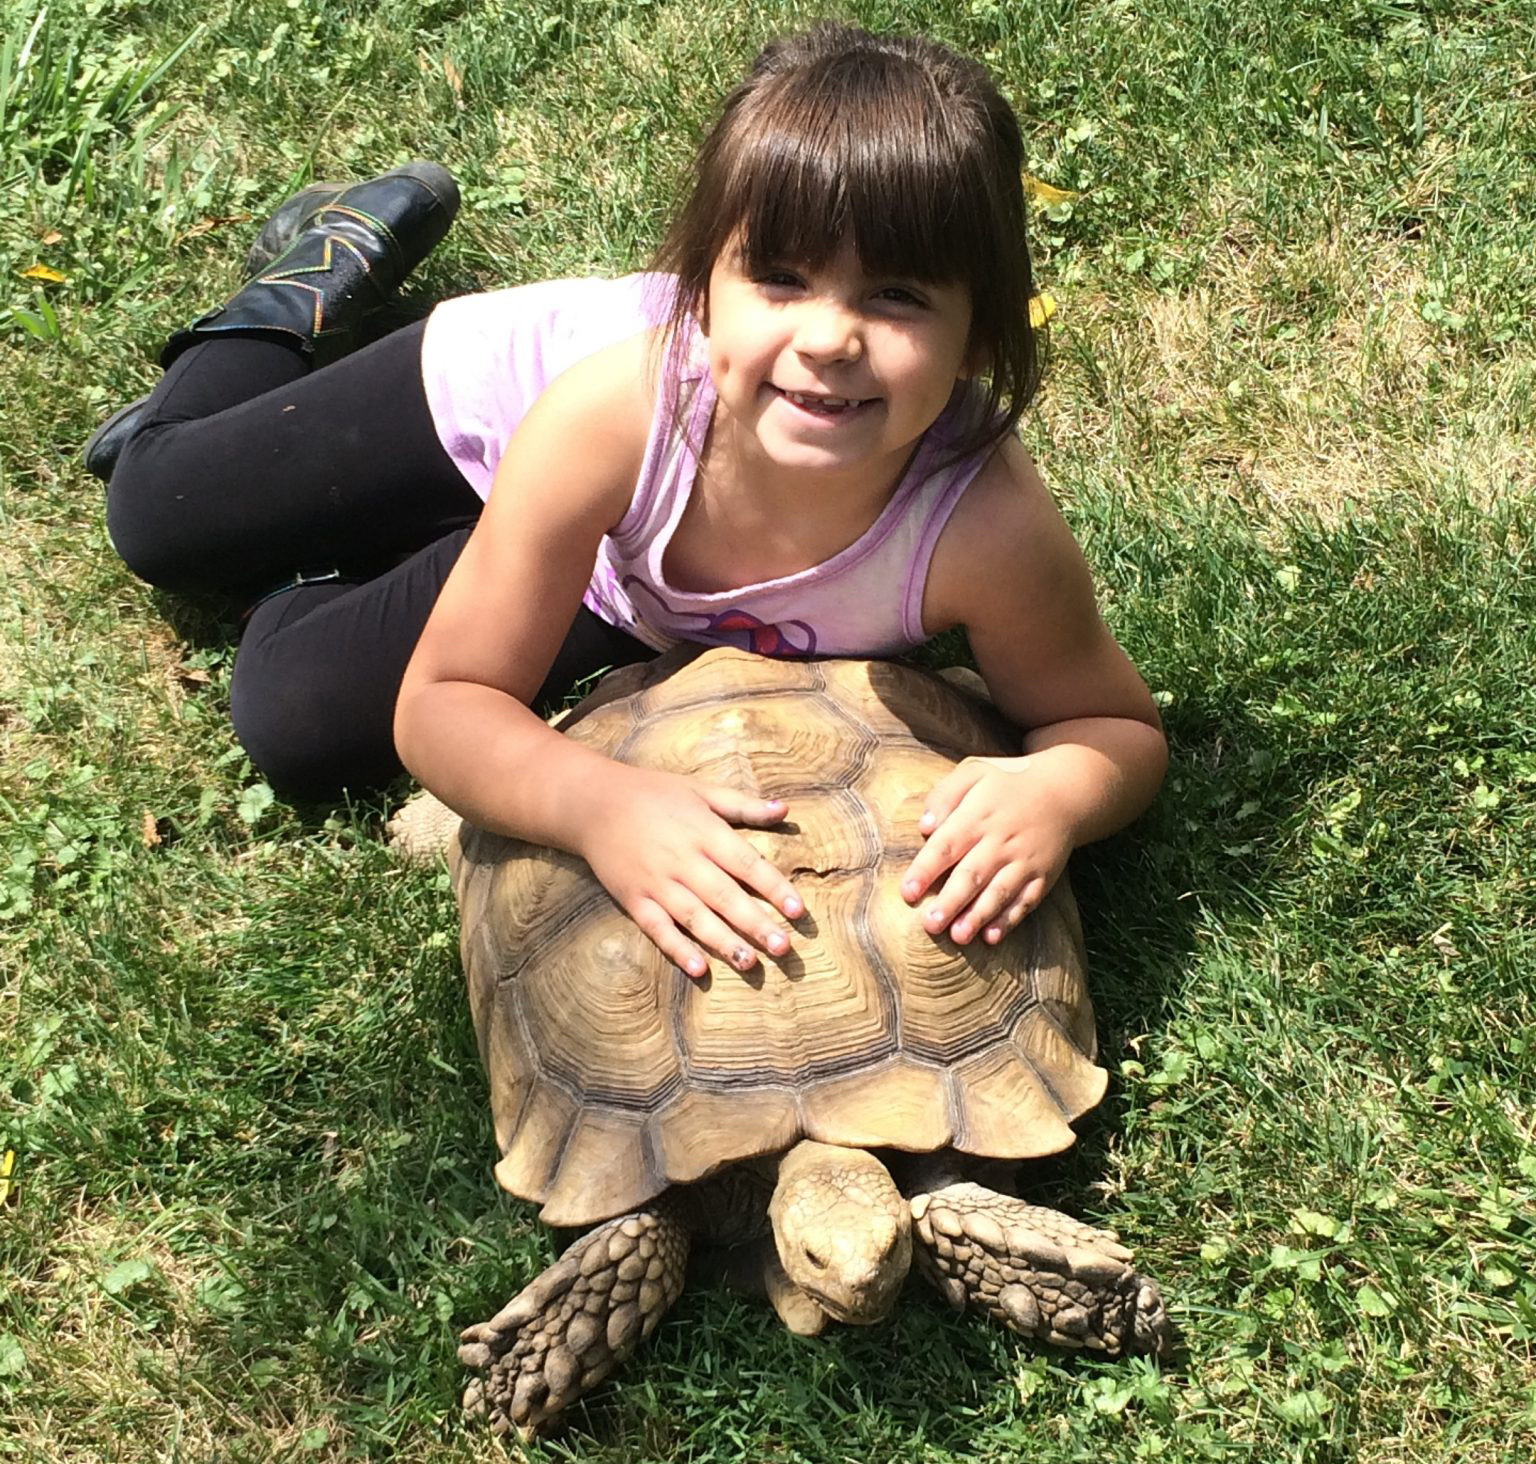 A young girl laying with a tortoise